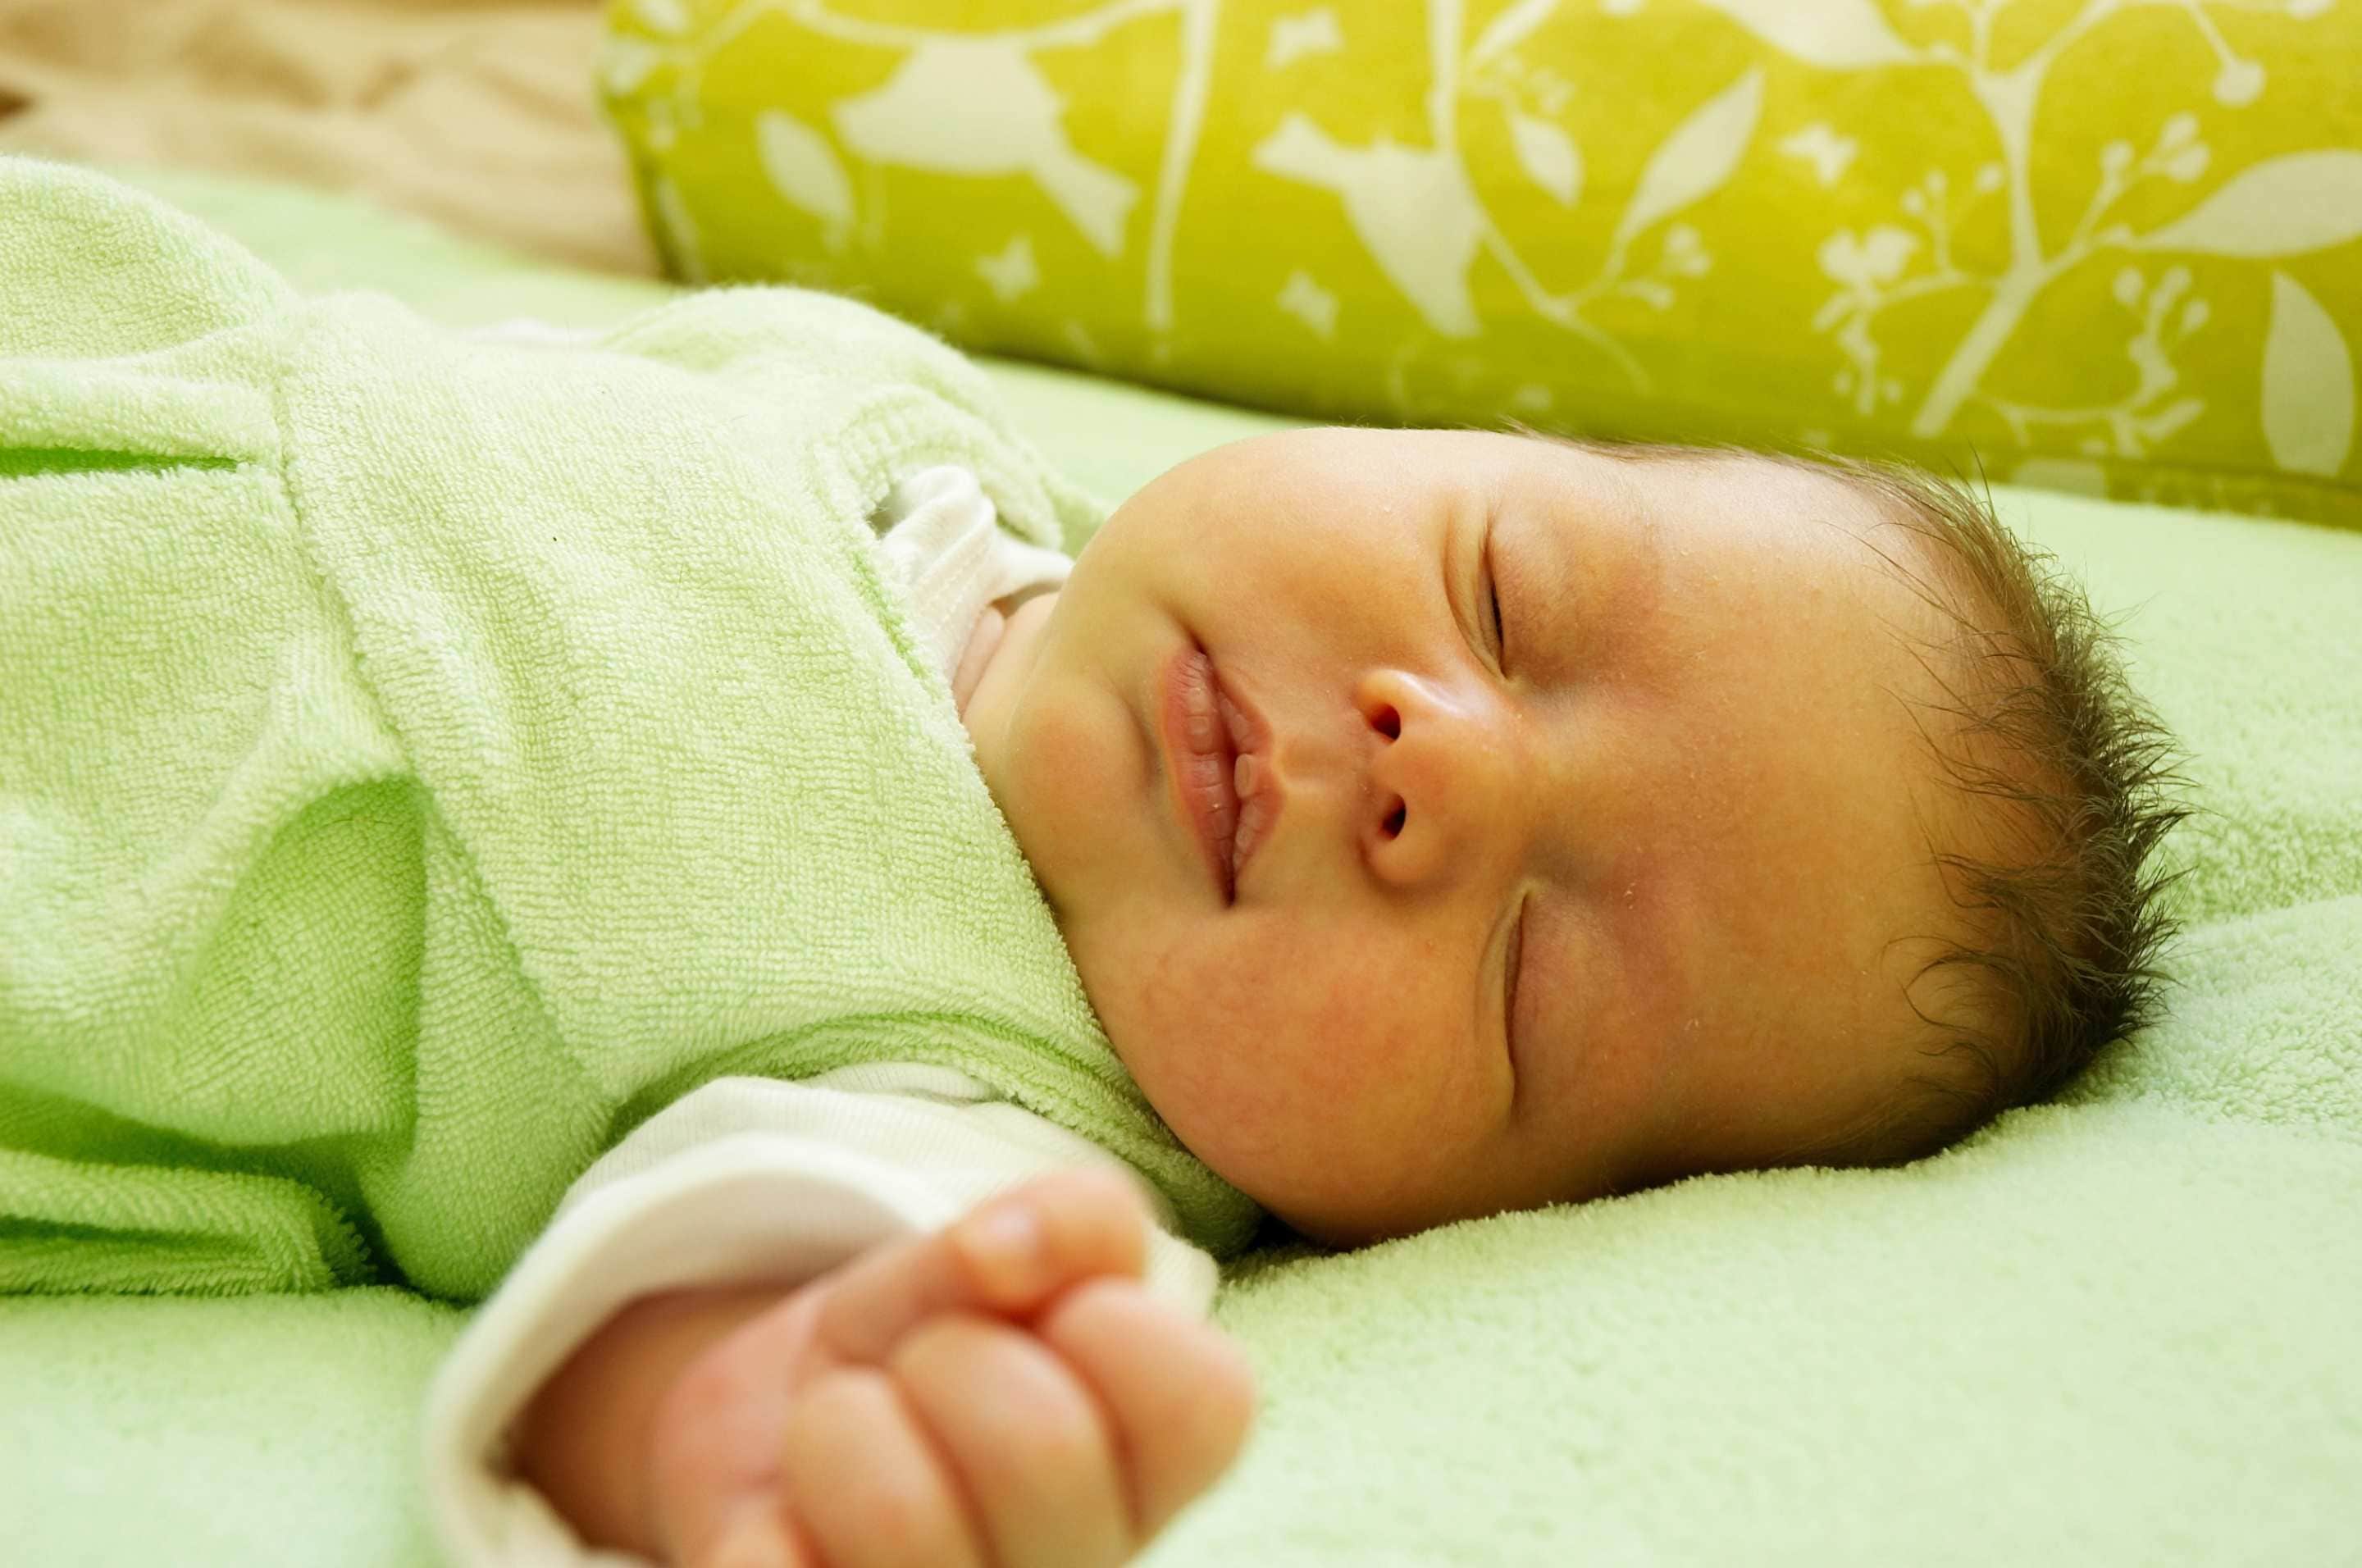 Sleep-related breathing disorders in infants and young children have been linked to several negative developmental effects. Photograph: iStock